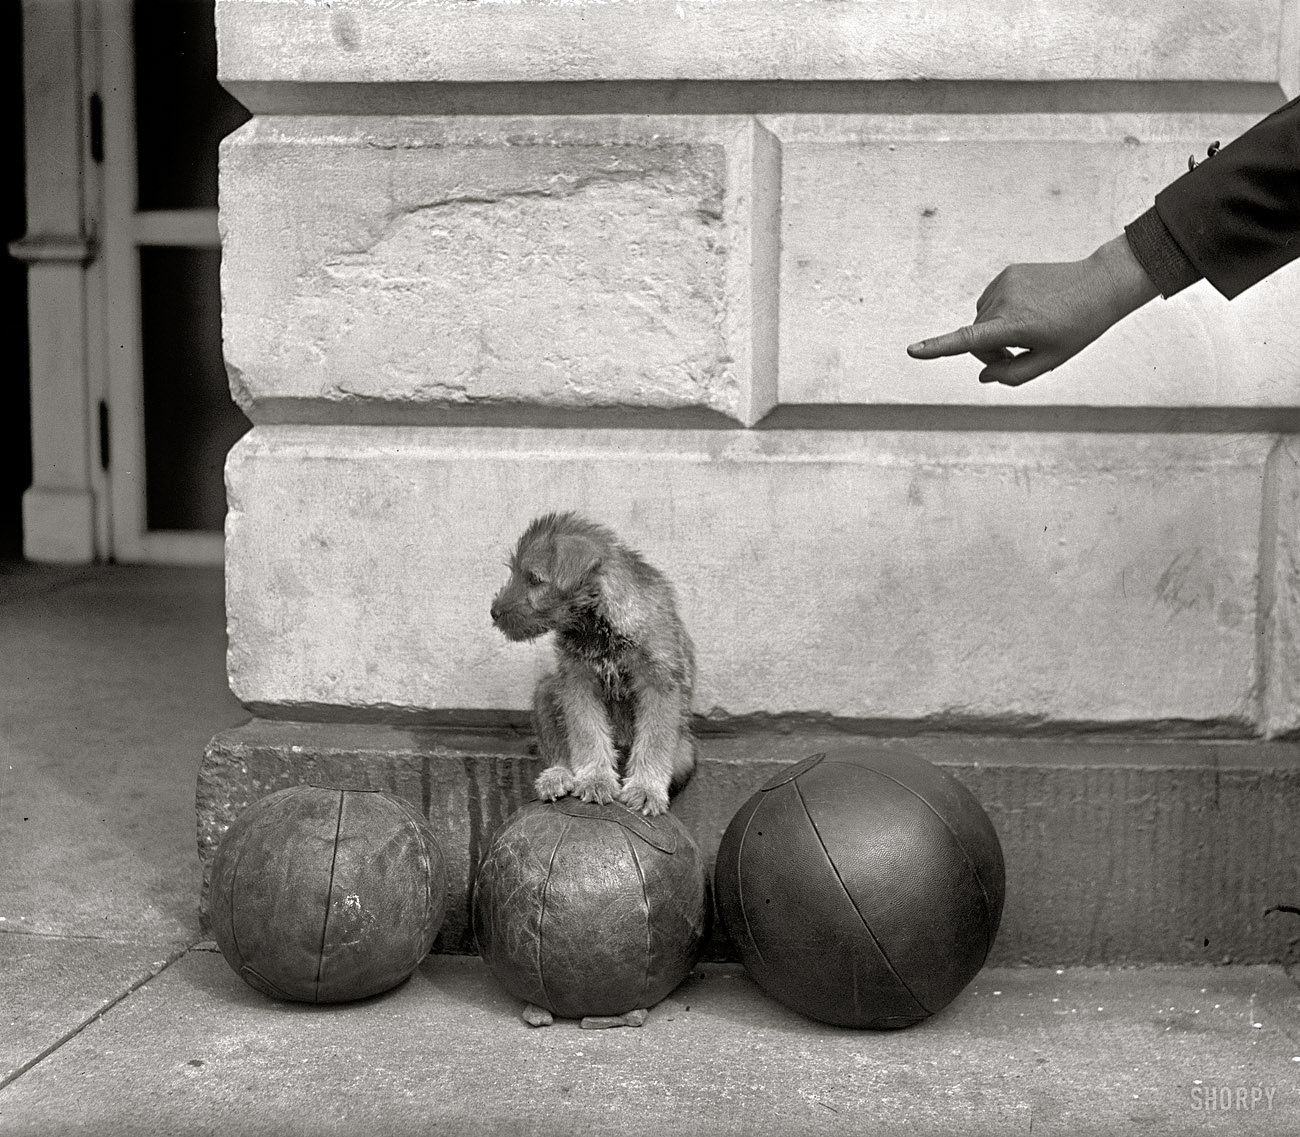 September 23, 1926. "White House dog, medicine balls." And that's all they wrote. National Photo Company Collection glass negative. View full size.